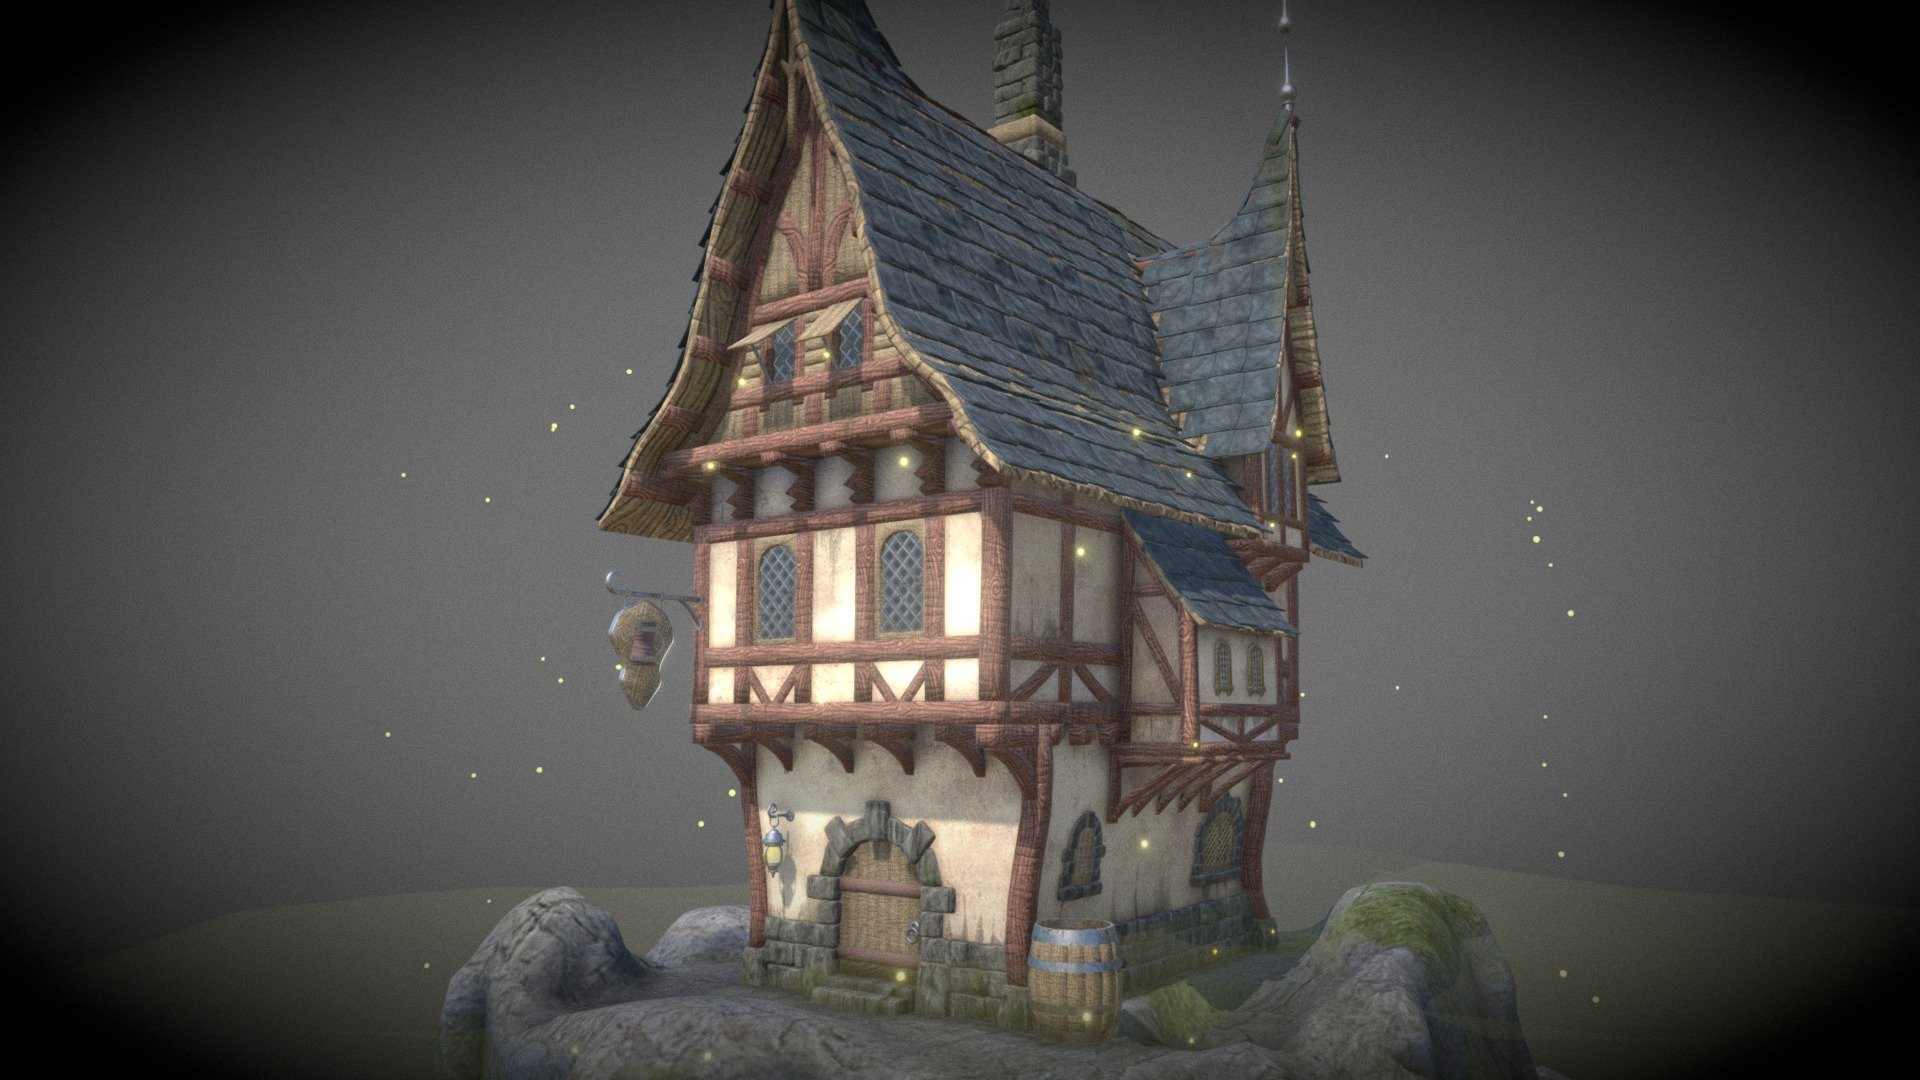 Artstation link for renders   Practice work for learning a new workflow involving sculpting and baking details from The Cliff Tower Fantasy Course. Wood and cliff texture used are from there.  Concept art  Cliff Tower Fantasy Course - The Cliff Tavern - Download Free 3D model by Matija Švaco (@svacomatija) 3d model